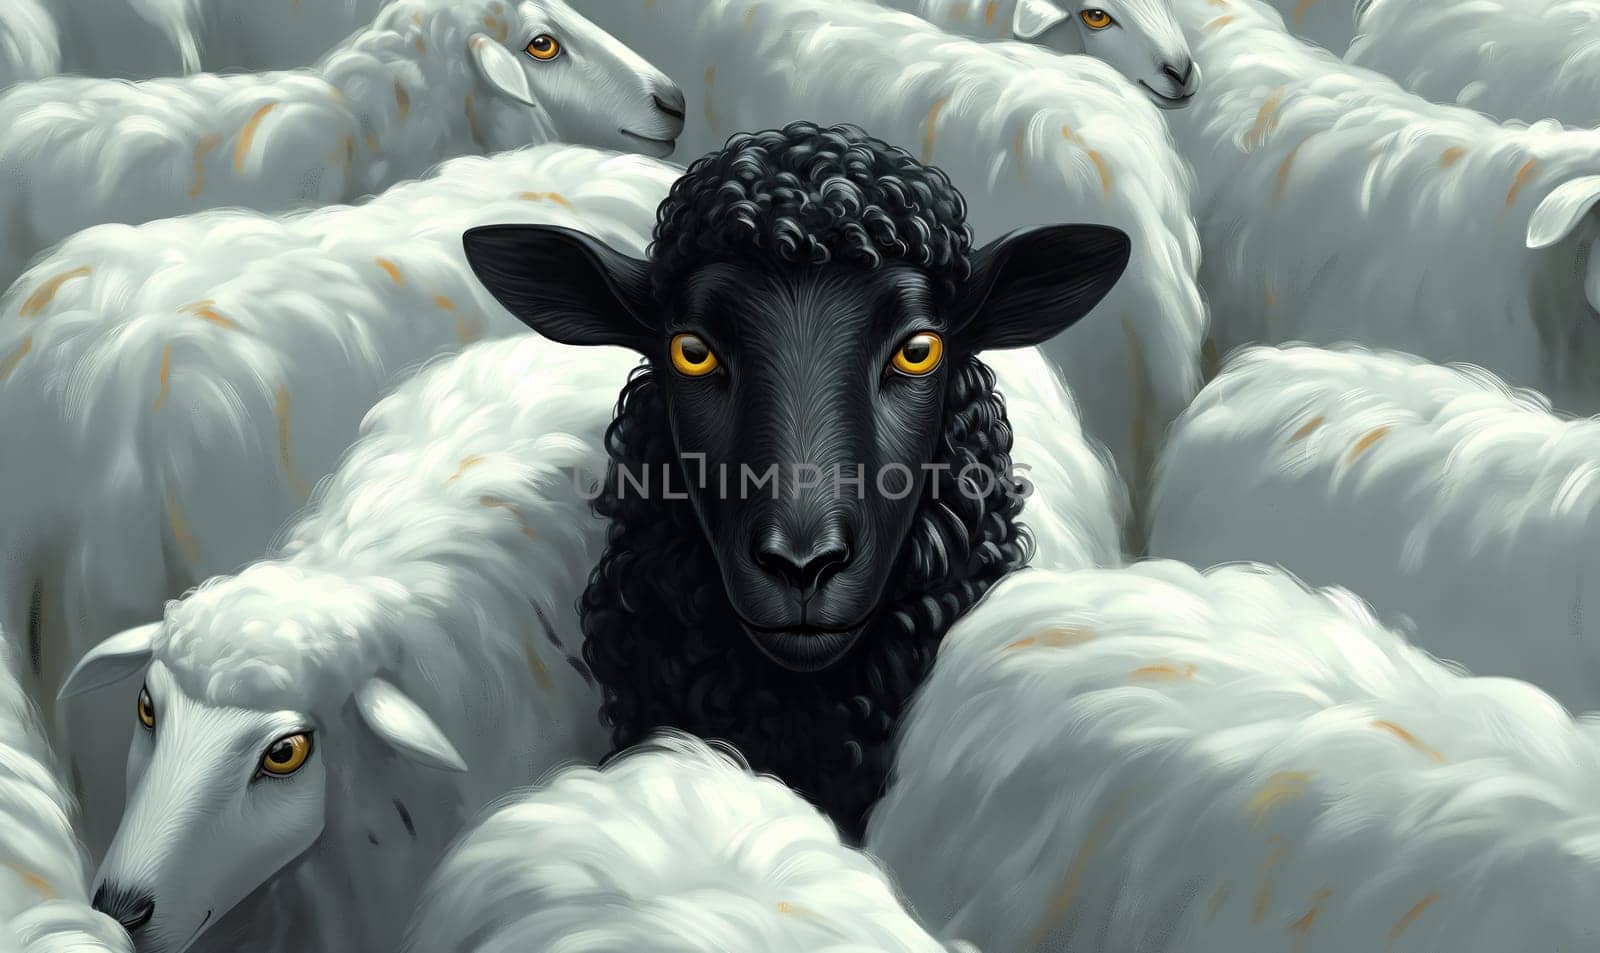 A black sheep among white sheep in a herd. Selective focus.